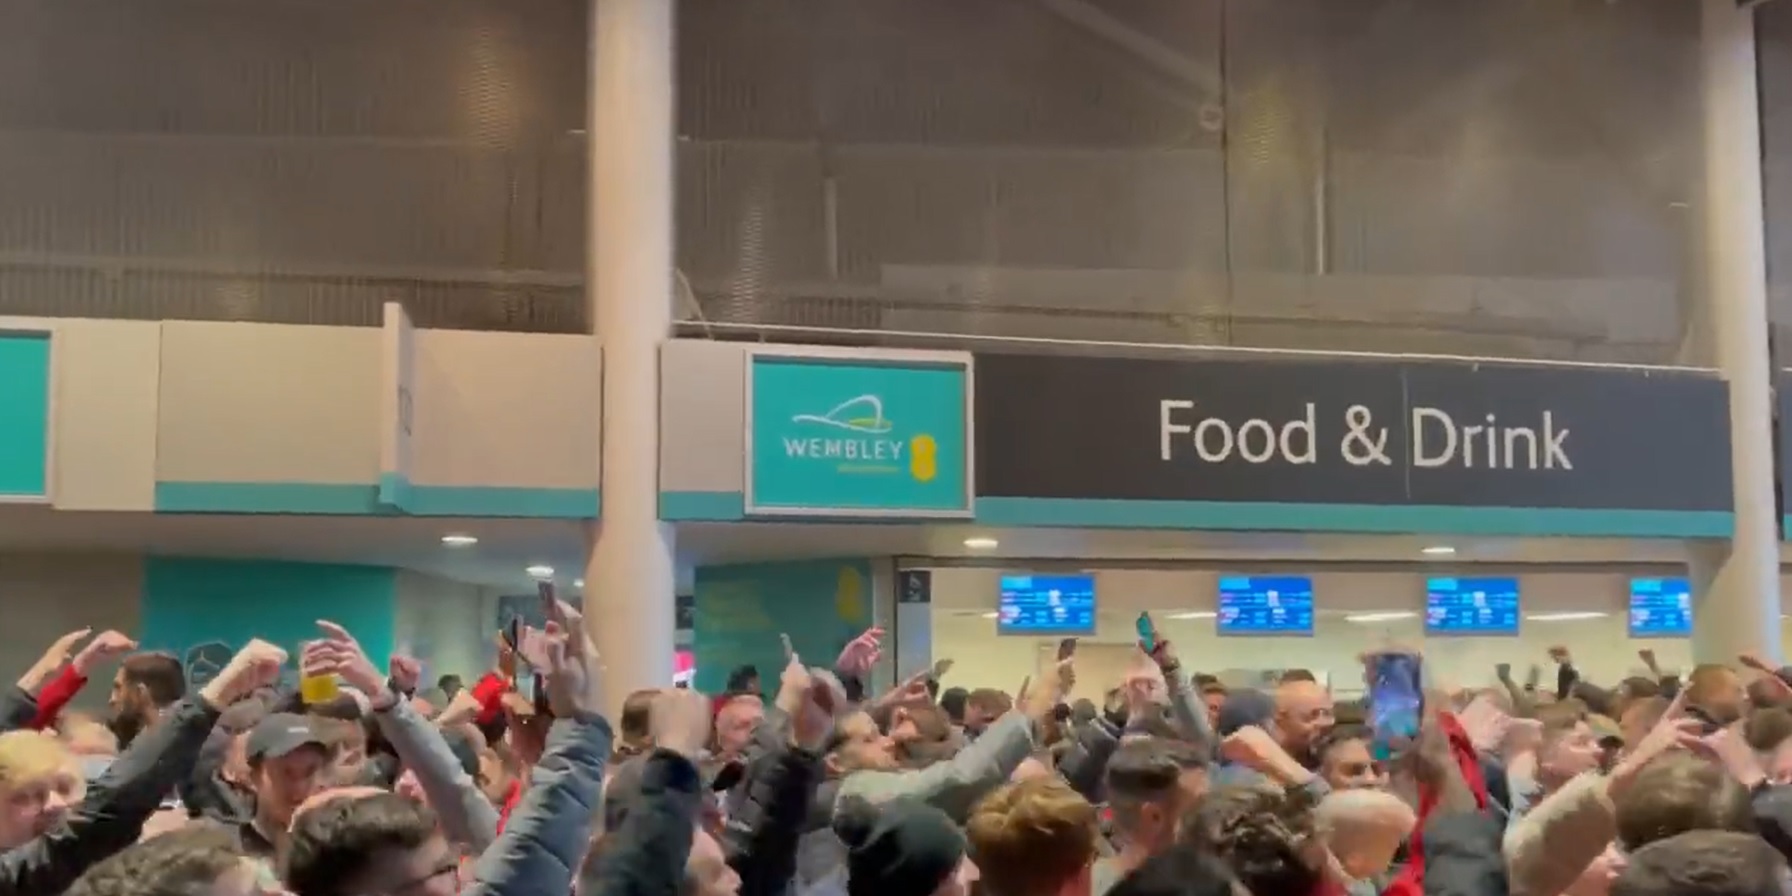 (Video) Watch these Liverpool fans singing Jota chant inside Wembley ahead of League Cup final clash